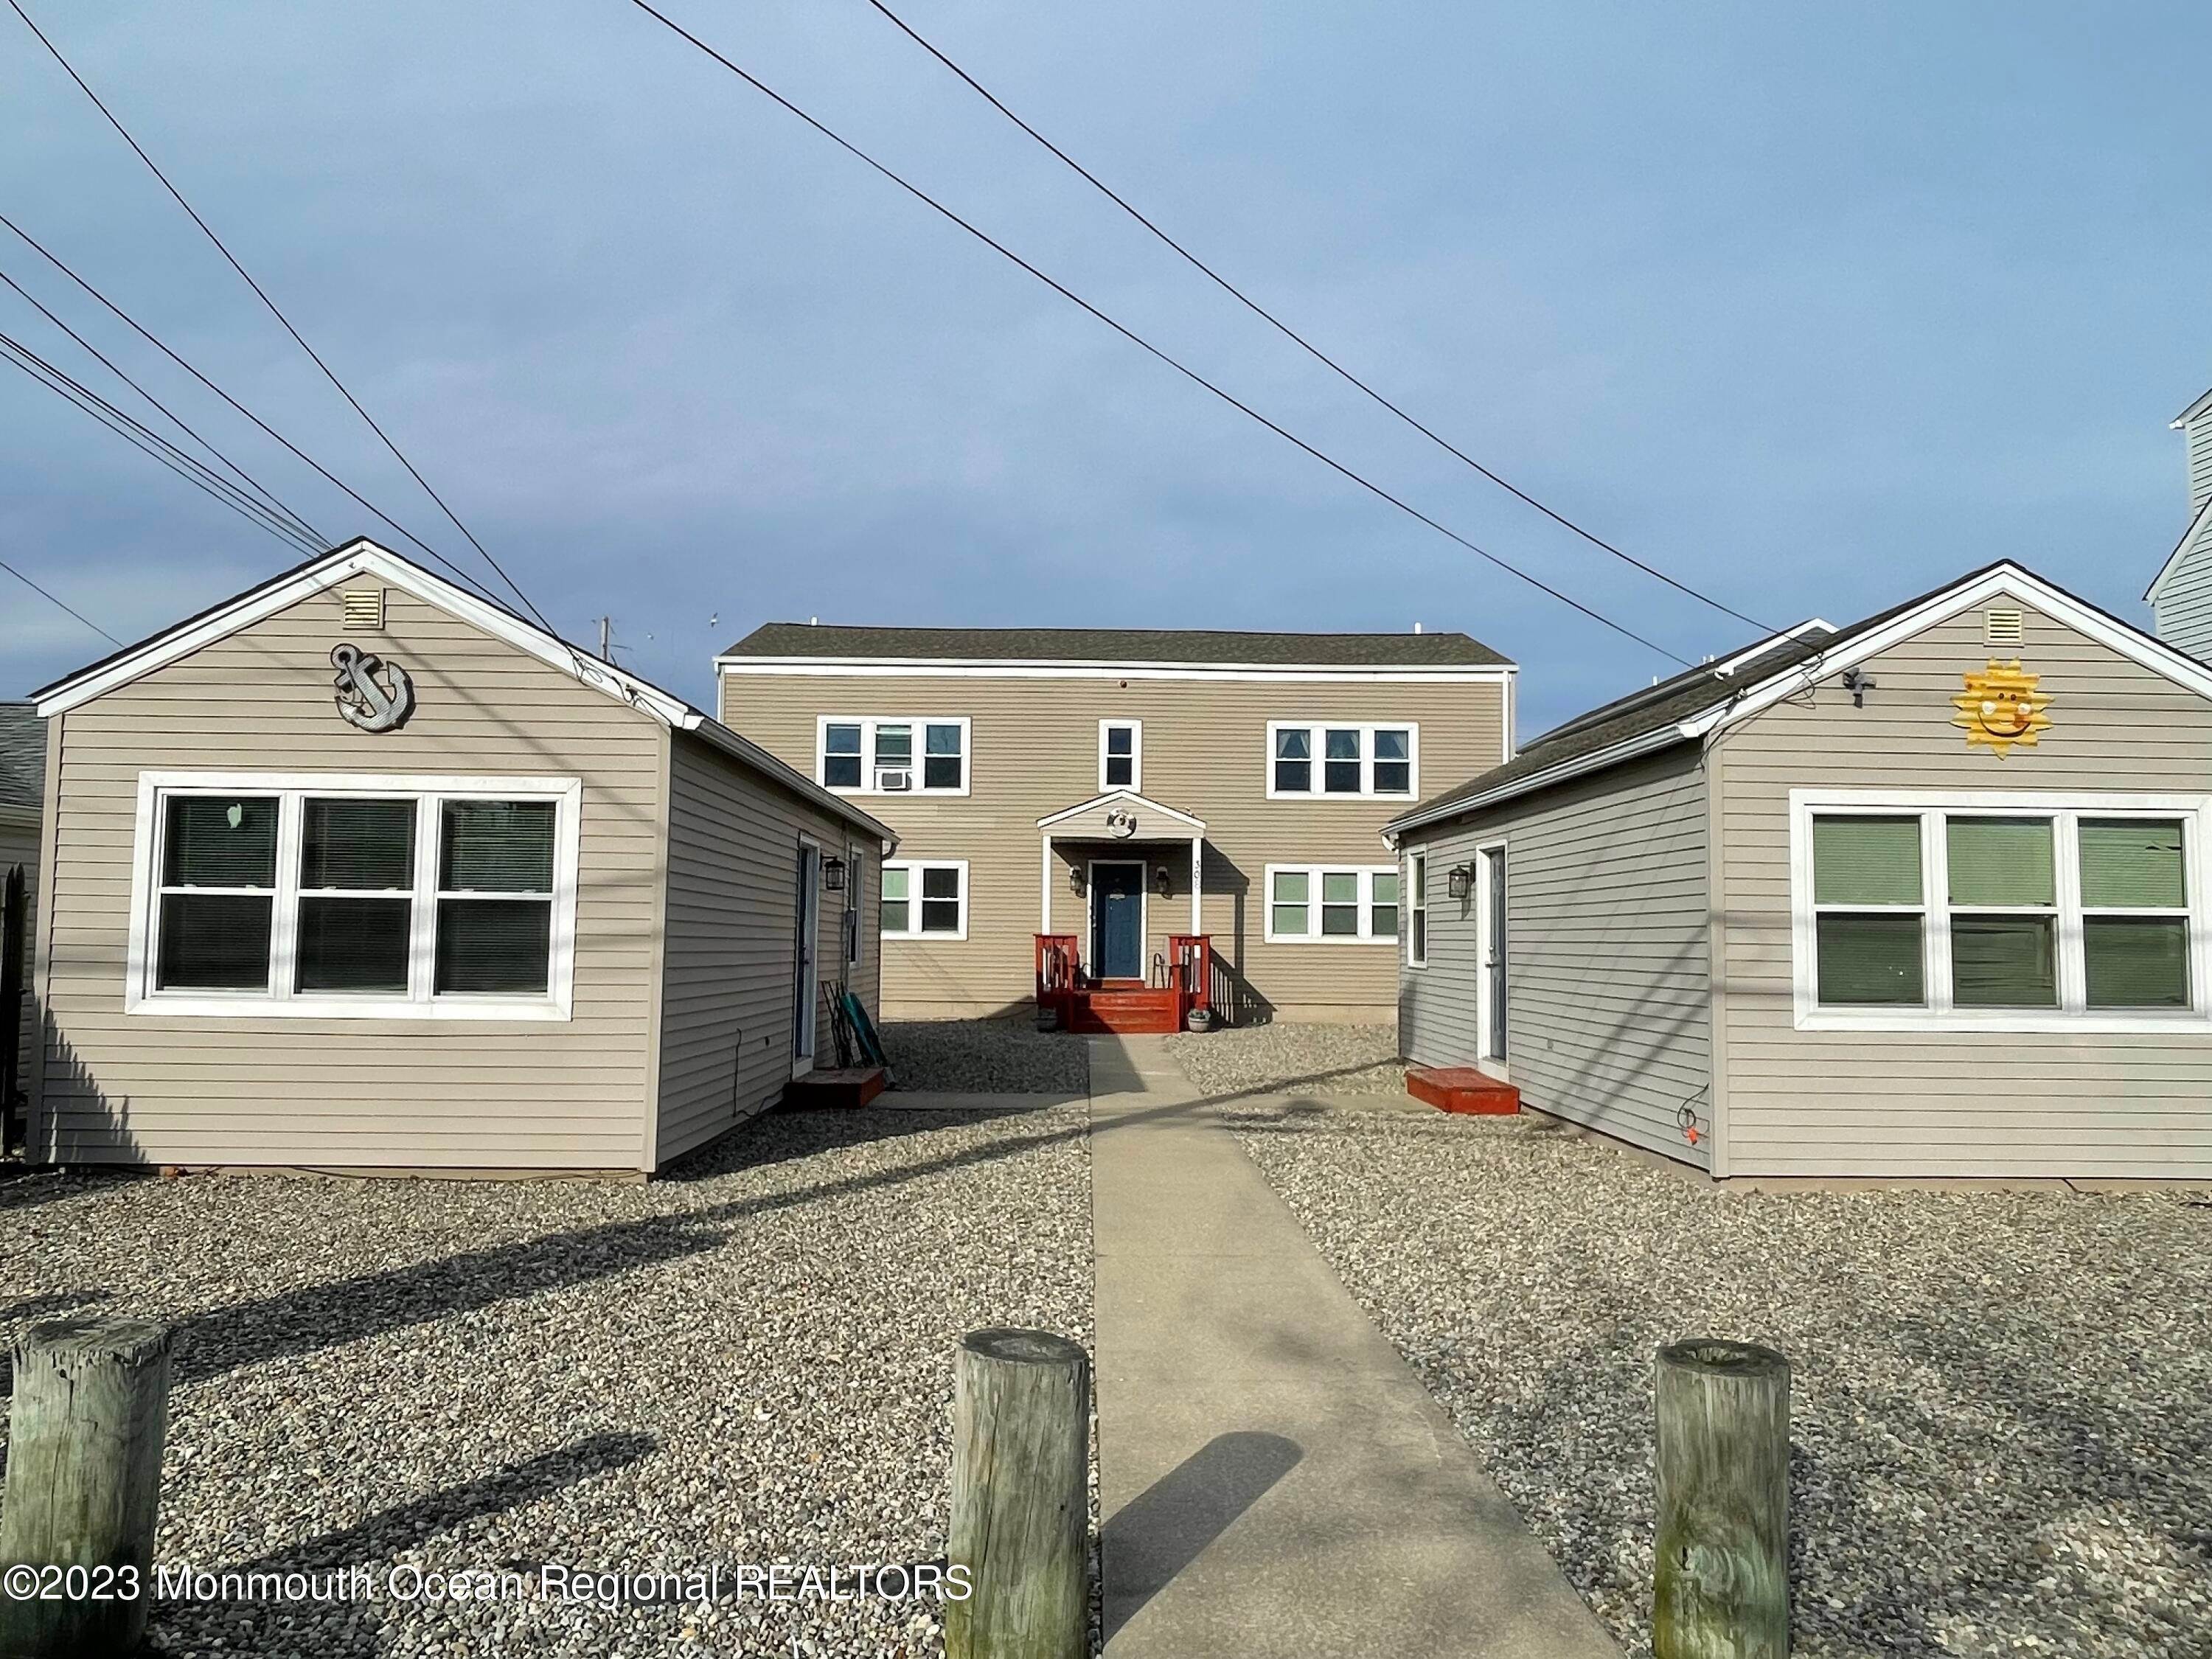 Property for Sale at 308 Sampson Avenue Seaside Heights, New Jersey 08751 United States